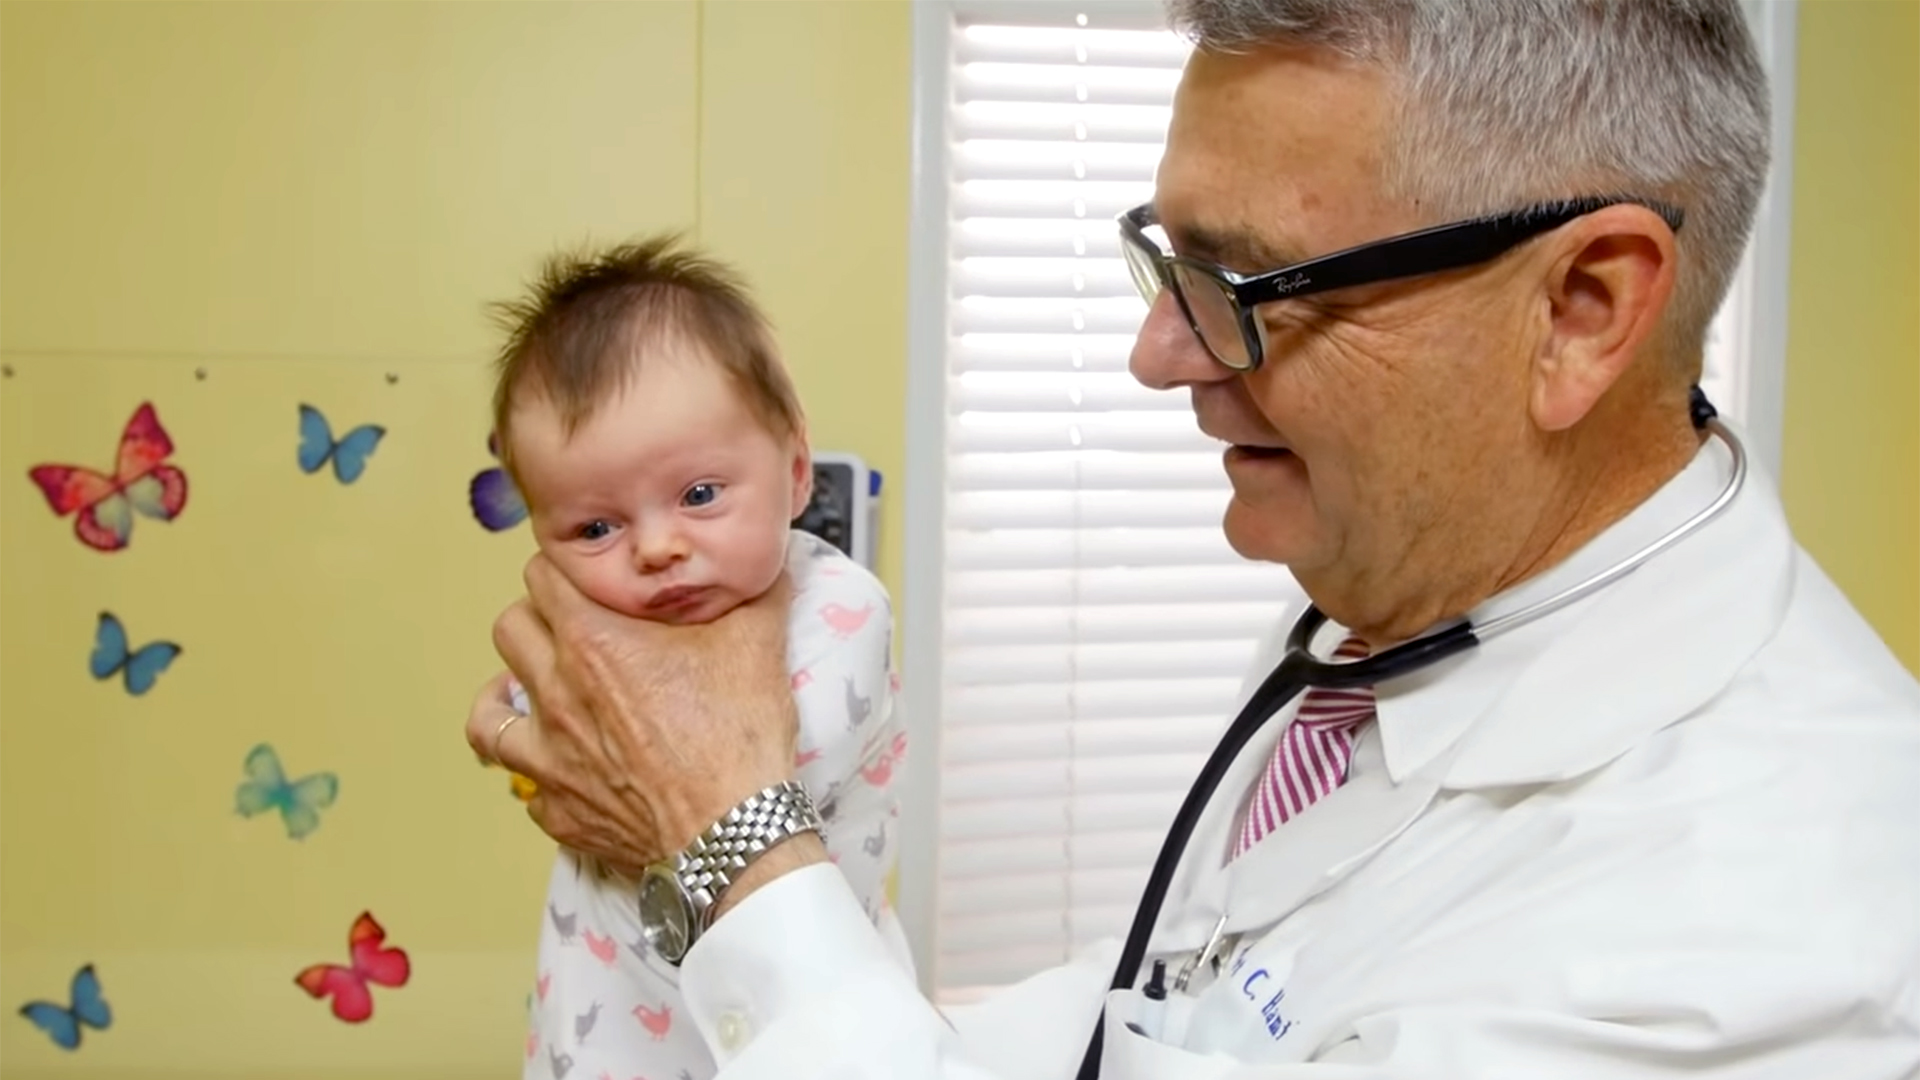 Pediatrician shows how to calm a crying baby in seconds - TODAY.com